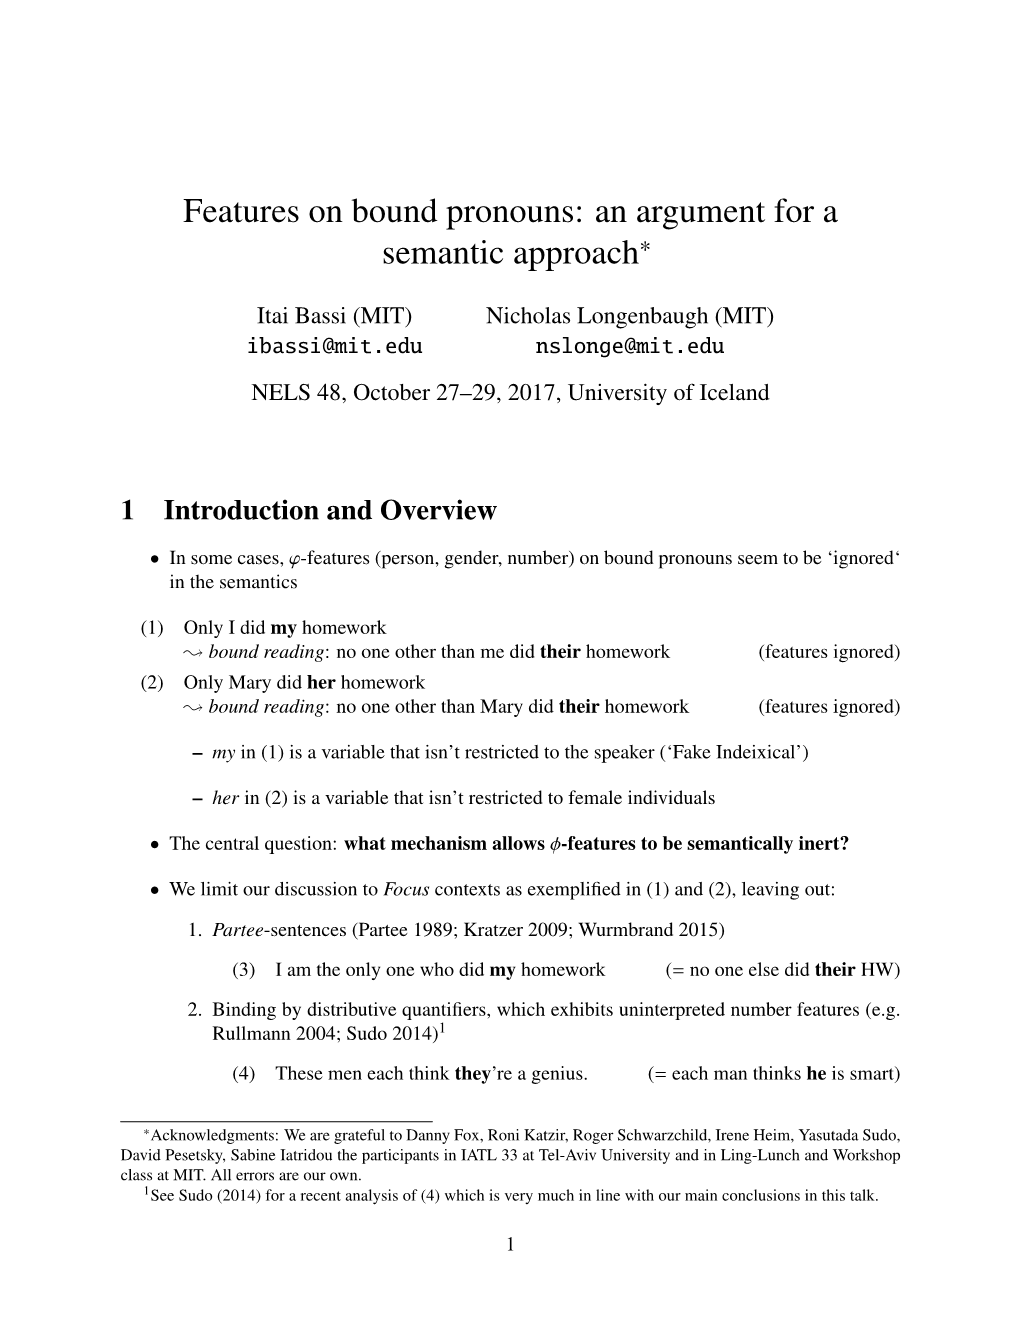 Features on Bound Pronouns: an Argument for a Semantic Approach*